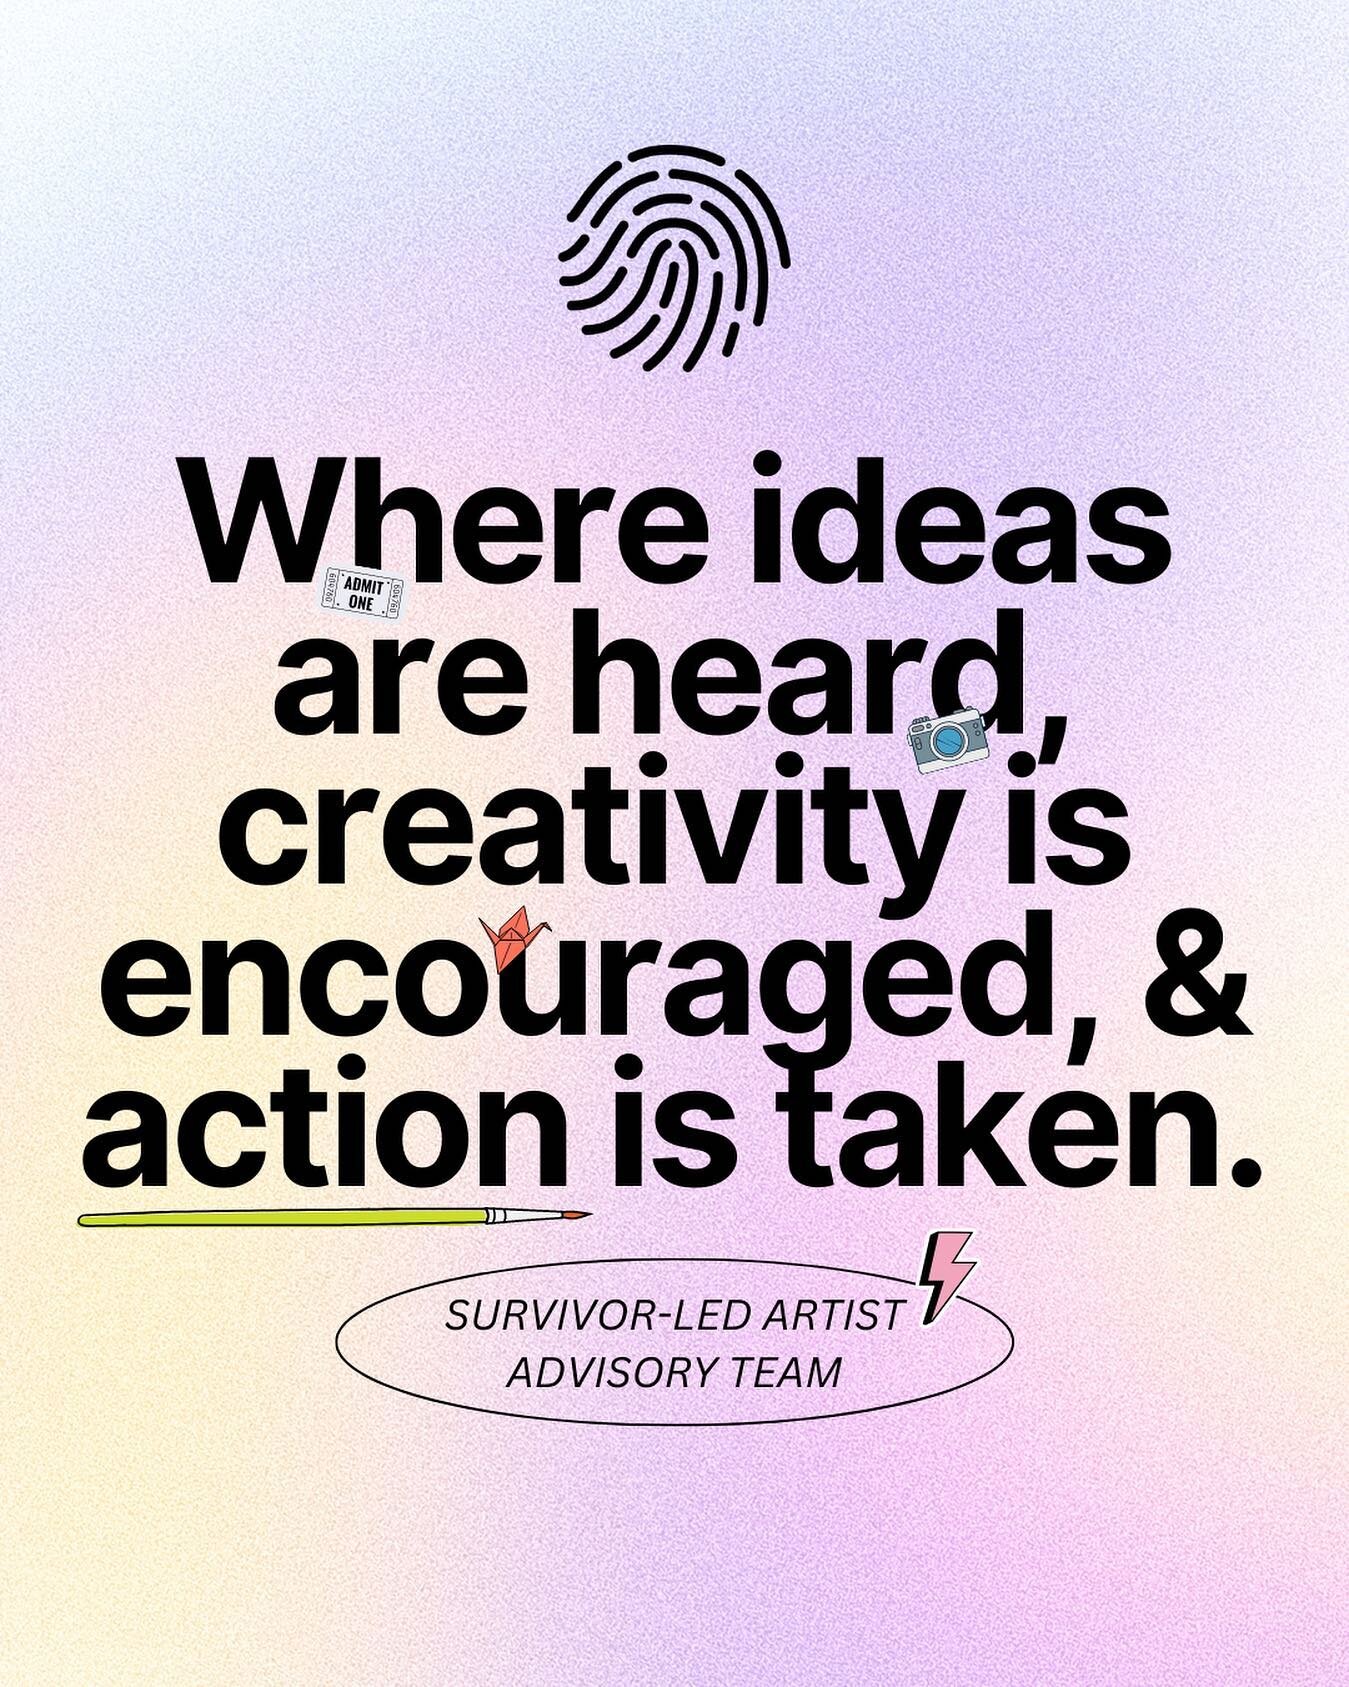 ⚡️This Sunday we have our first Survivor-Led Artist Advisory Team meeting!⚡️

This team was brought together for a couple reasons: because it&rsquo;s the first of its kind, and because we want to make sure we are doing our best in all we do at Artist